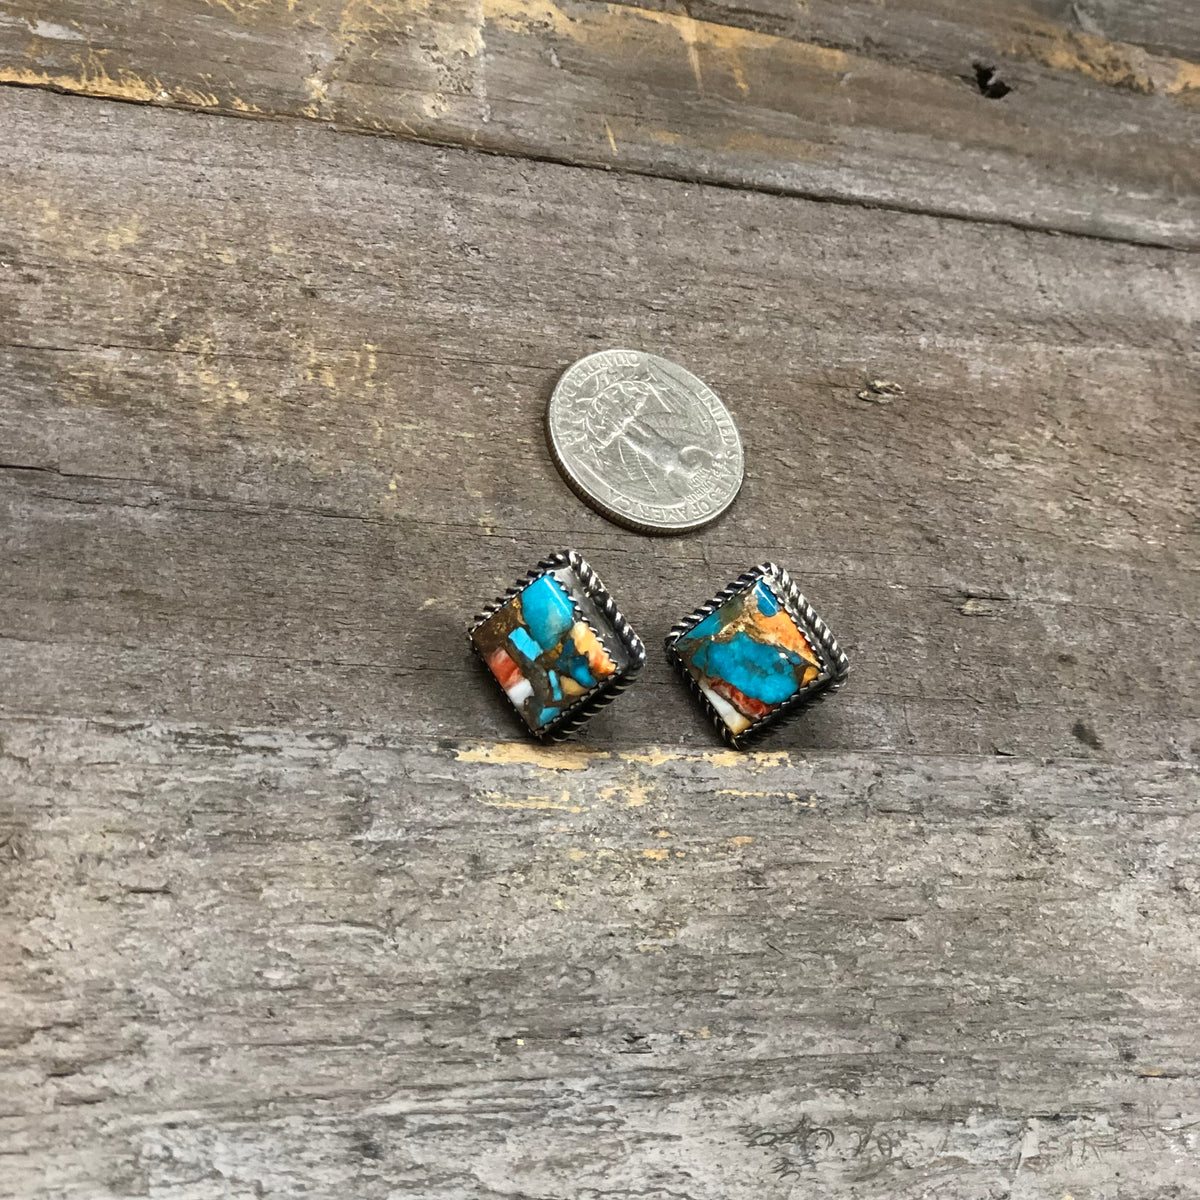 Handmade Navajo Sterling Silver, Kingman Turquoise, and Spiny Oyster Earrings